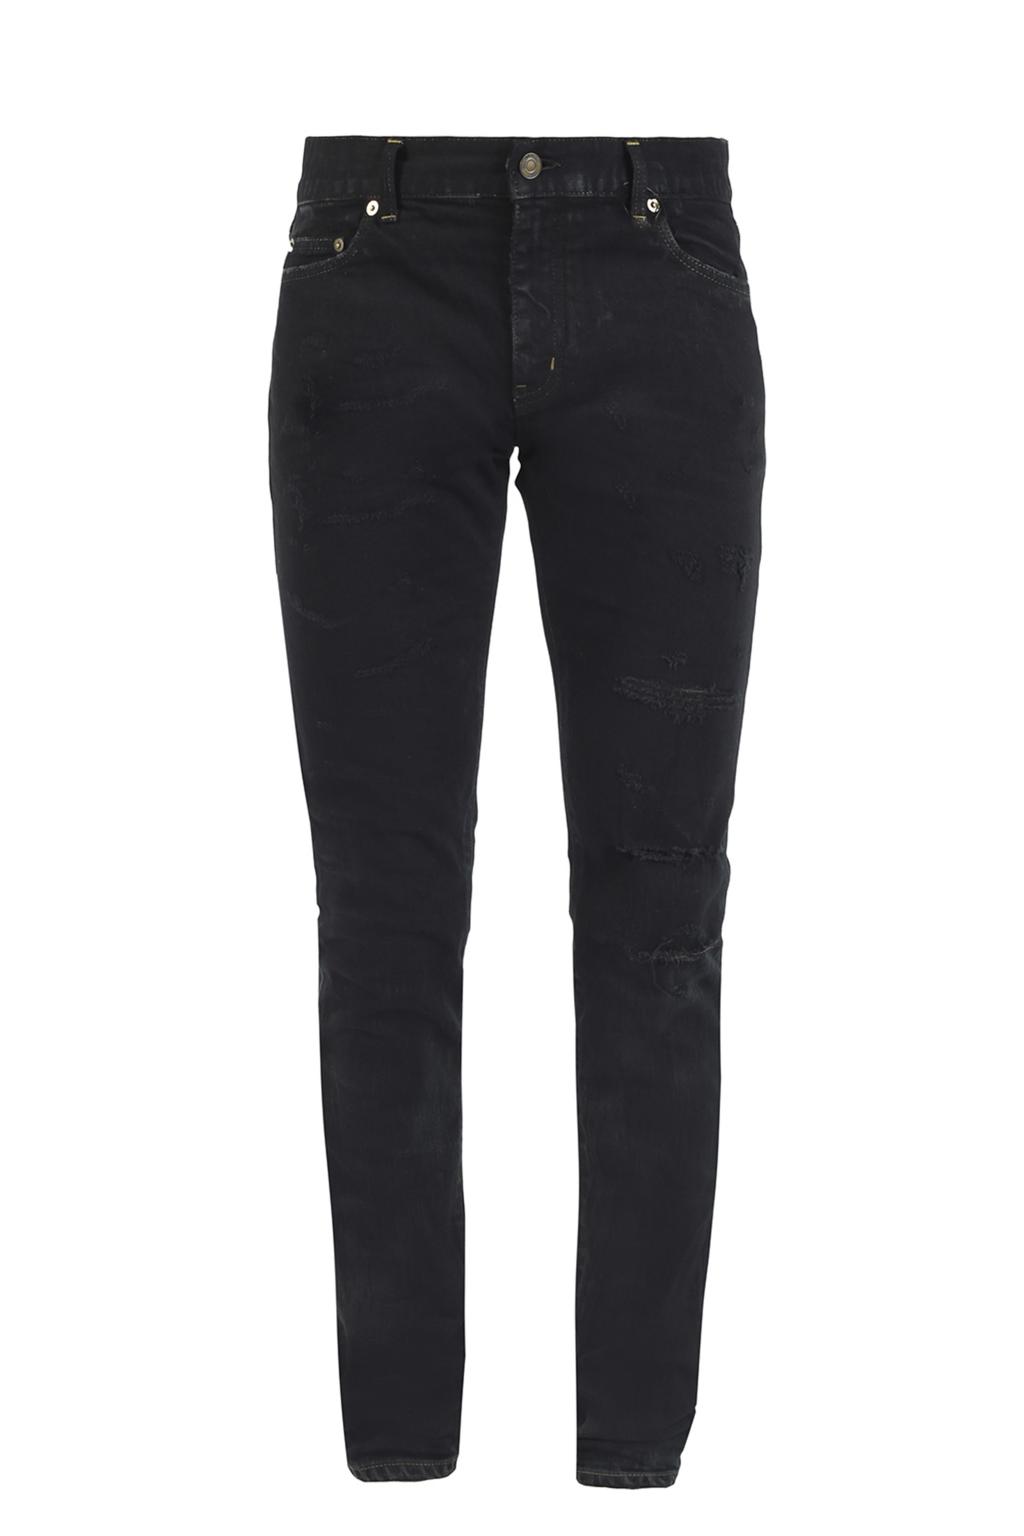 black ripped jeans canada